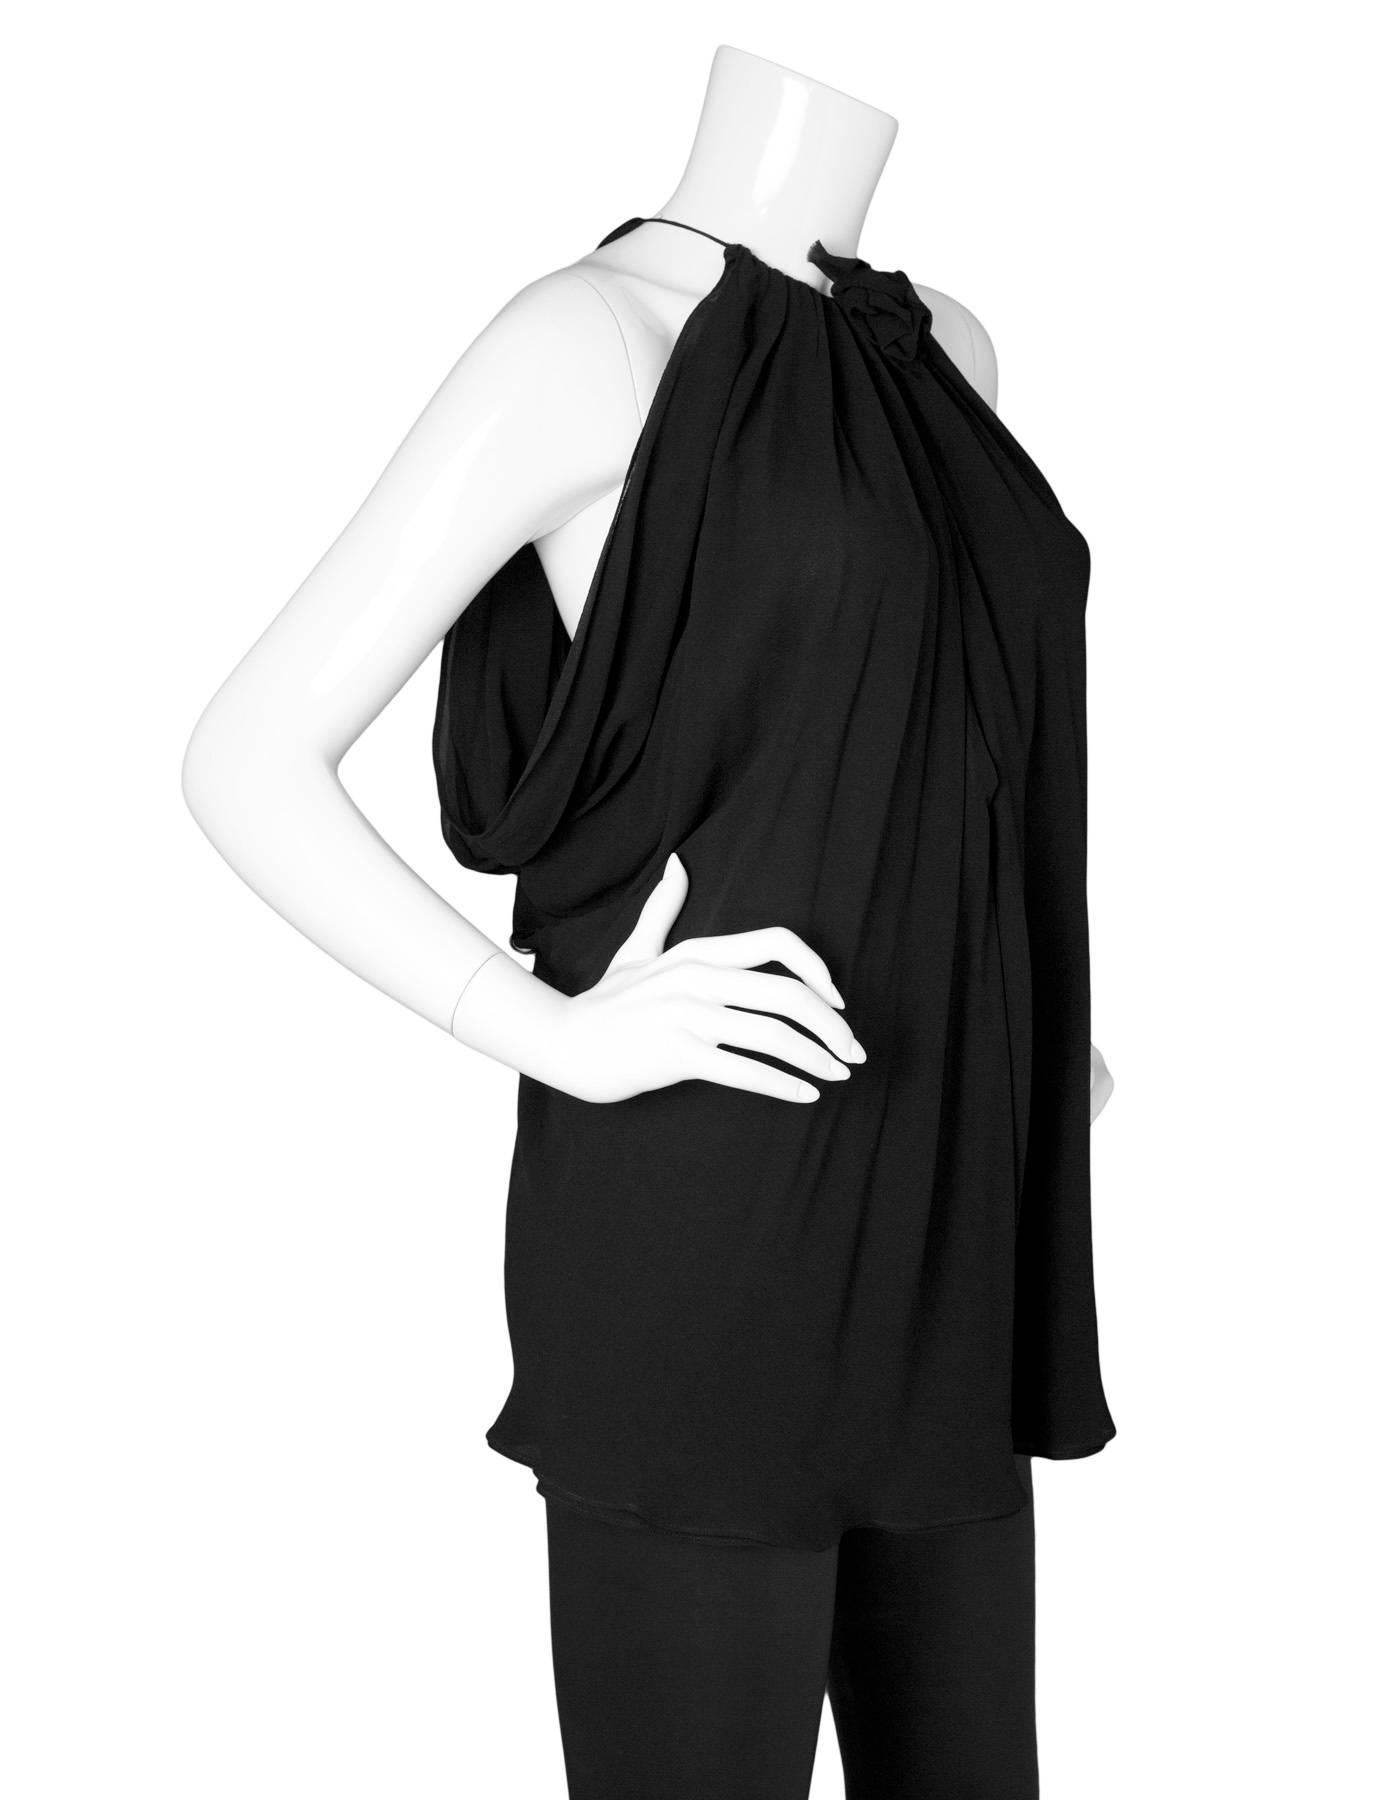 Derek Lam Black Silk Sleeveless Draped Blouse 
Features flower detail at neckline and keyhole opening at bust

Made In: Italy
Color: Black
Composition: 100% silk
Lining: Black, 100% silk
Closure/Opening: Pull over with hook and eye and keyhole